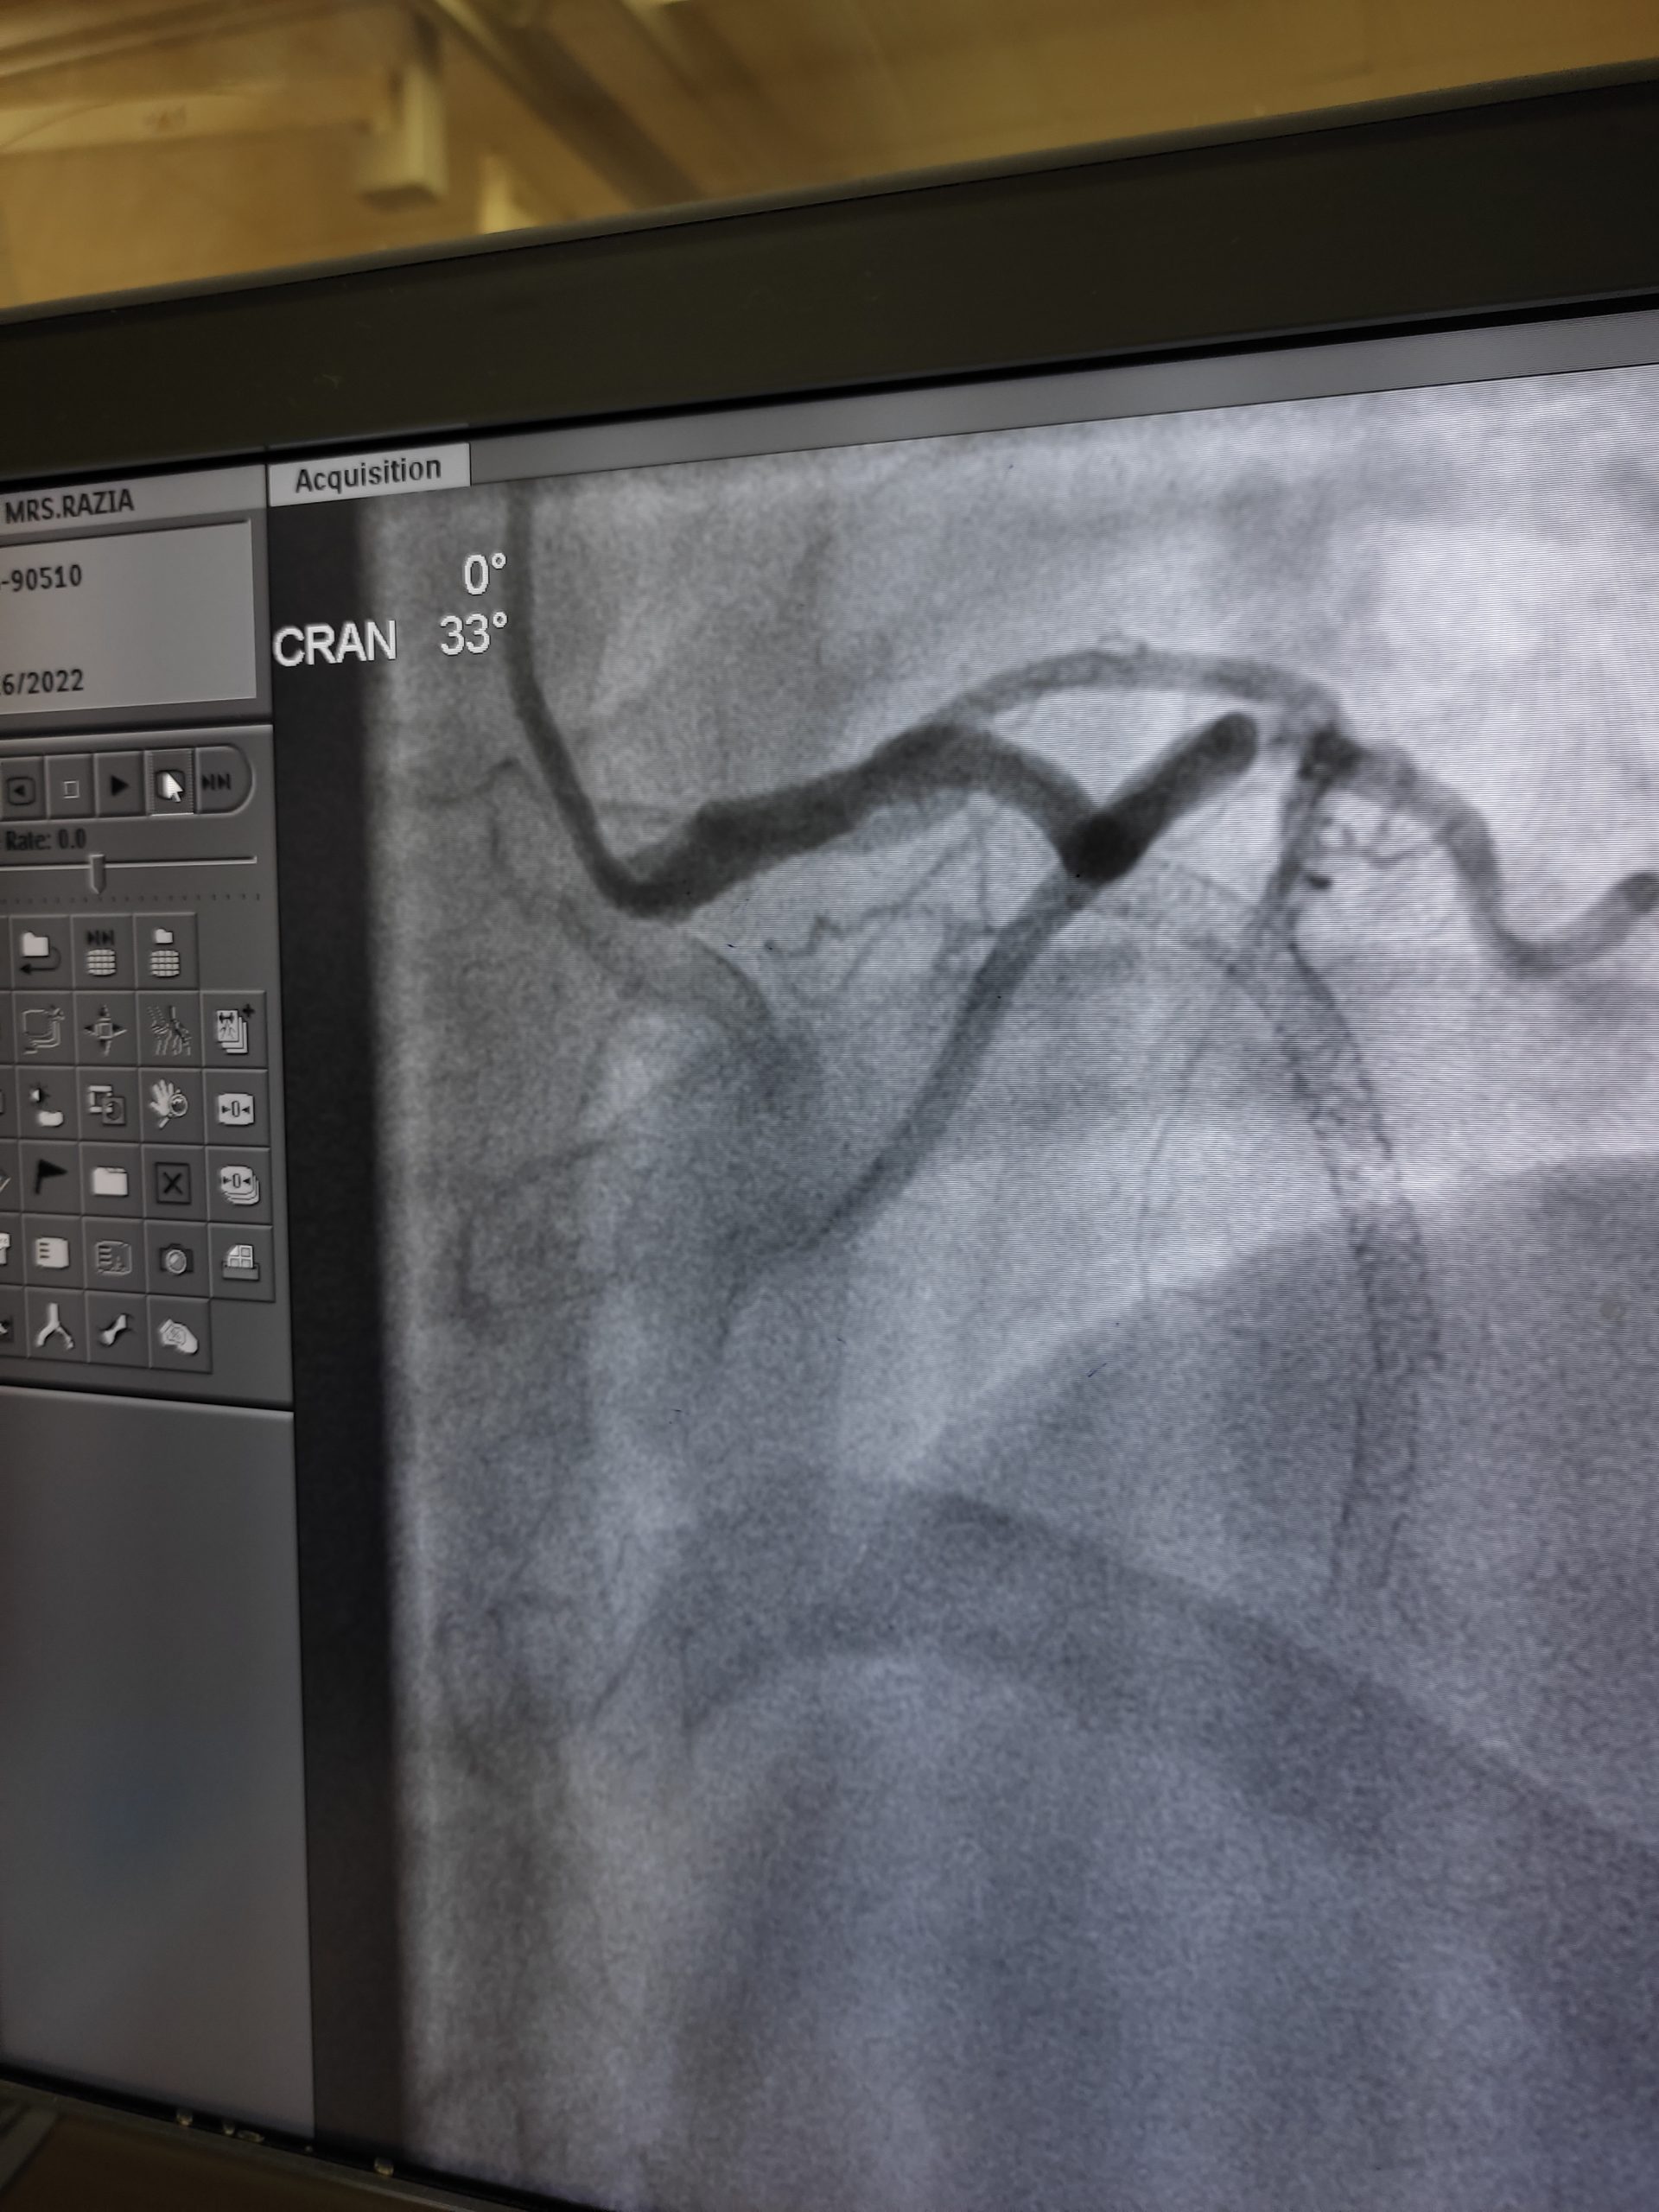 “Living with Chest Pain One Year After Stent Placement: What to Expect”